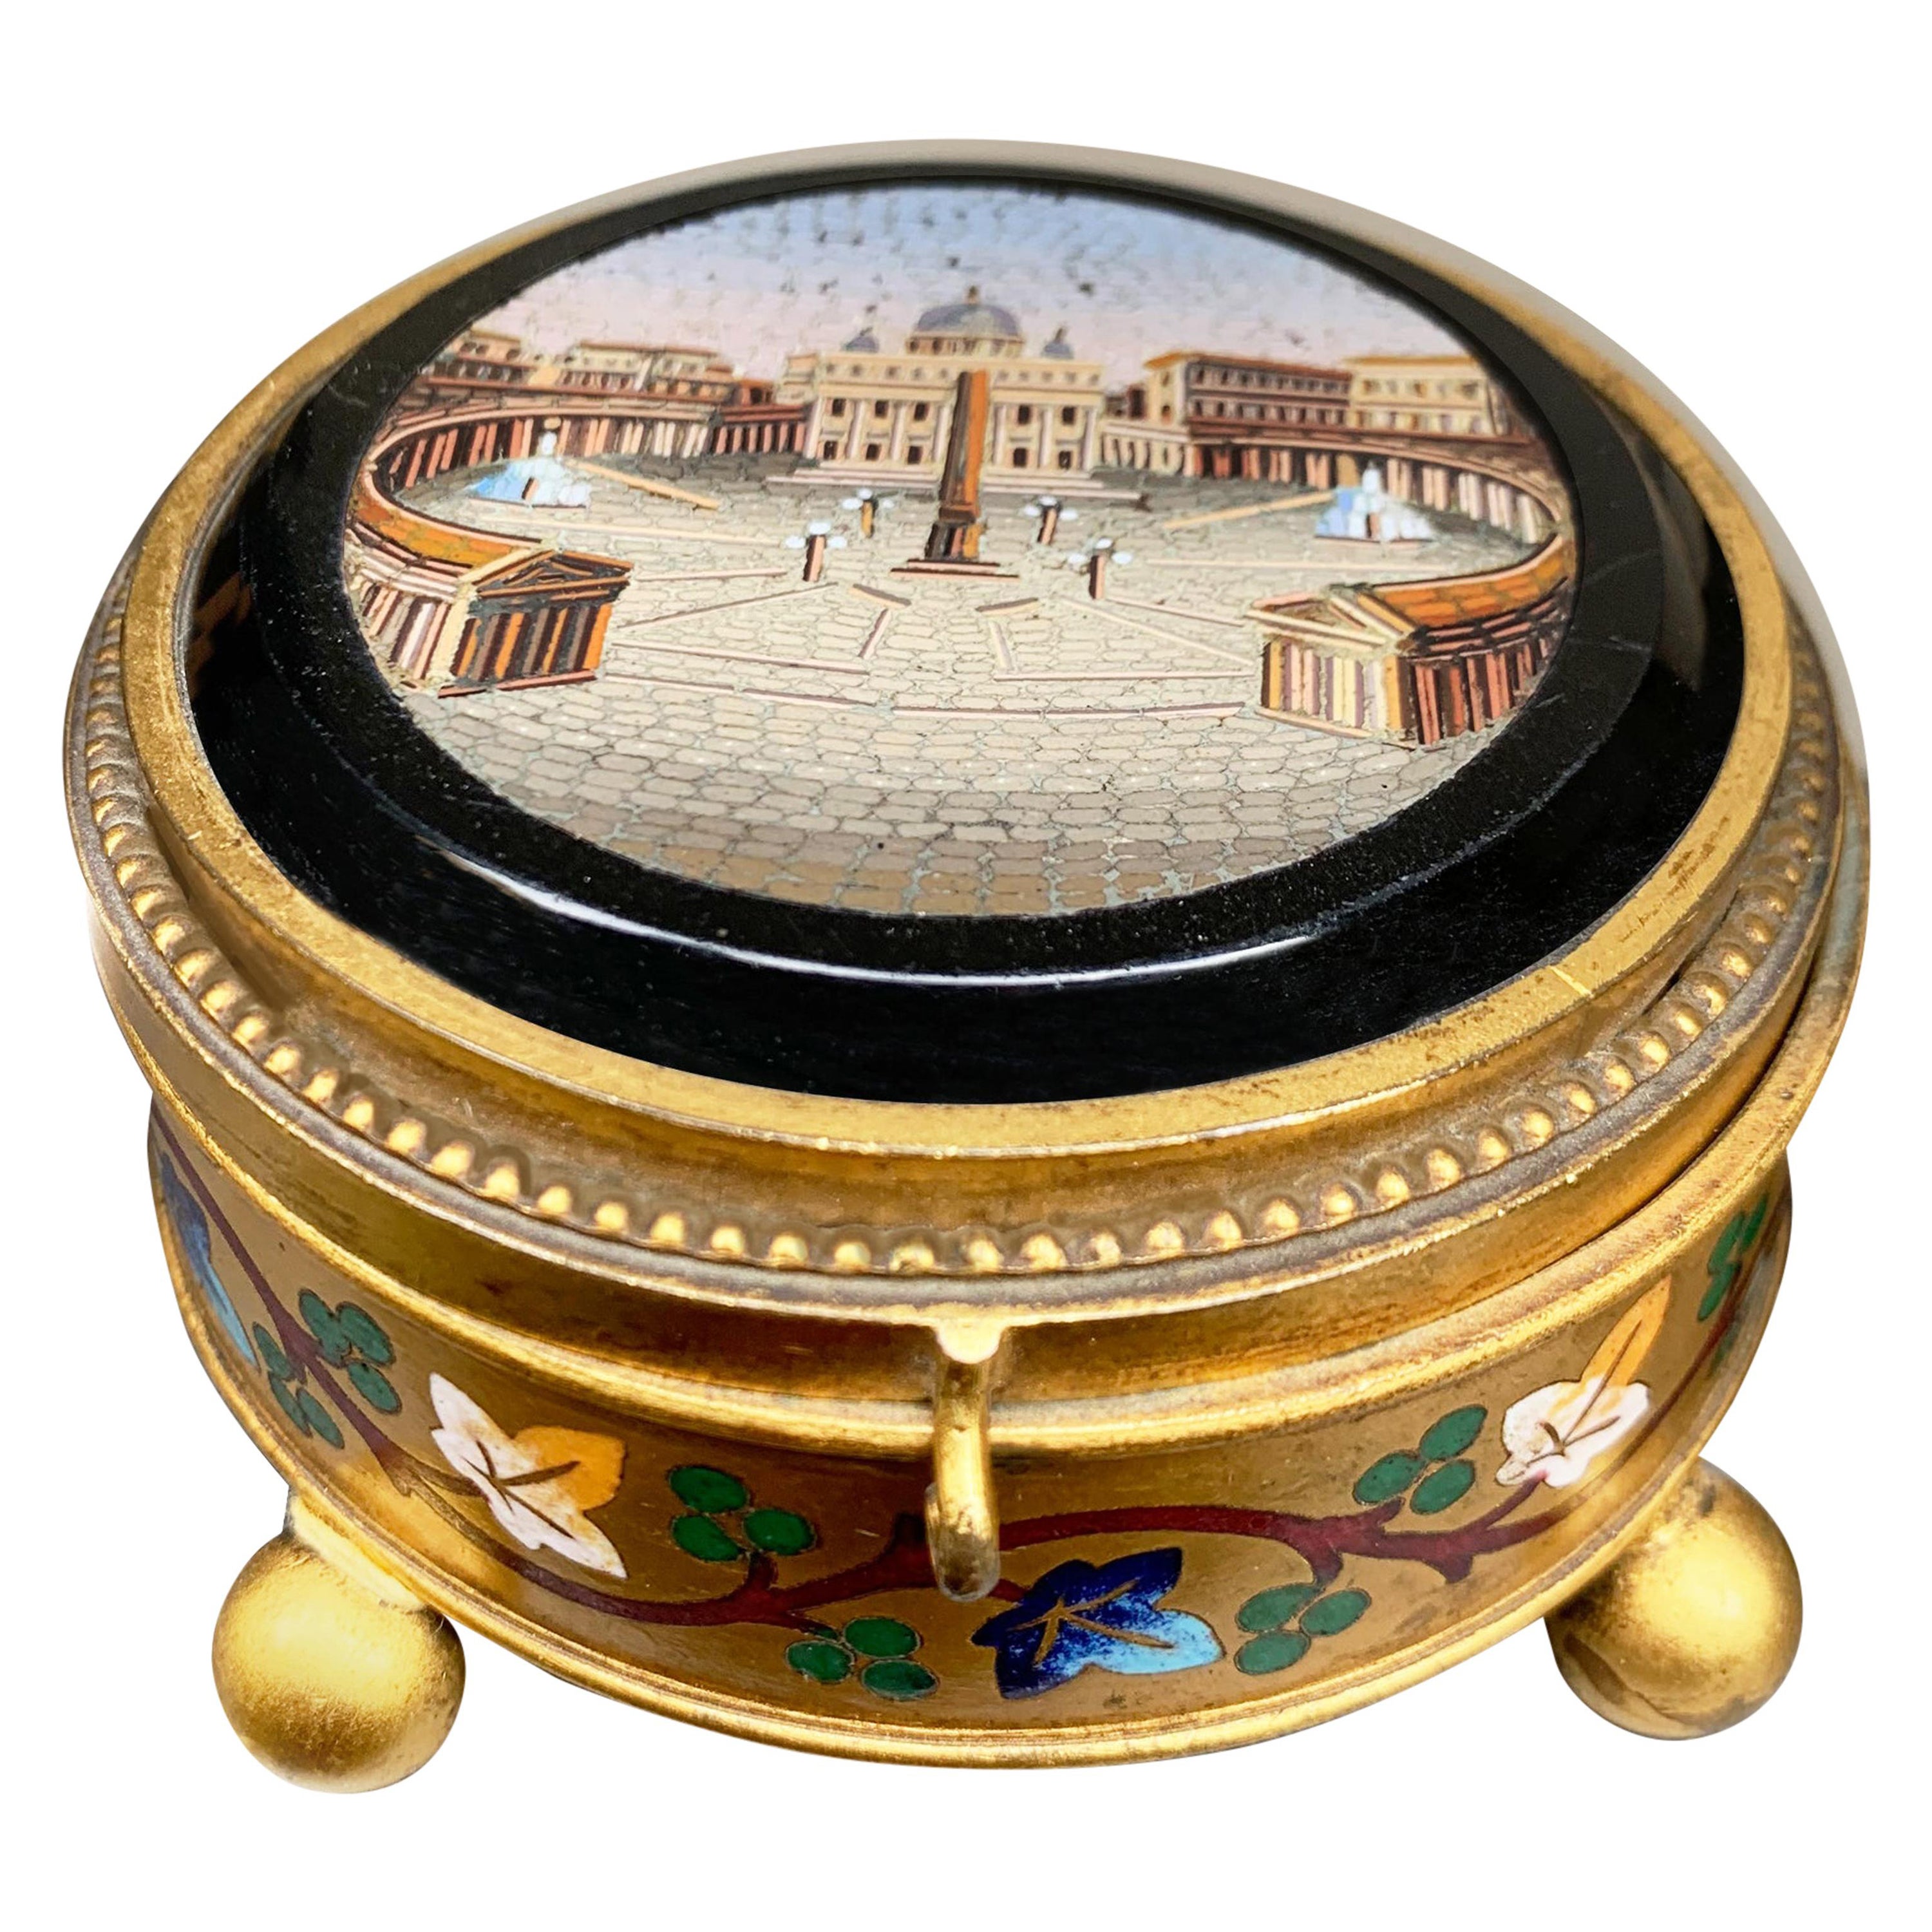 St. Peter's Basilica Micromosaic 'circa 1850' Set in a Gilded Bronze Box